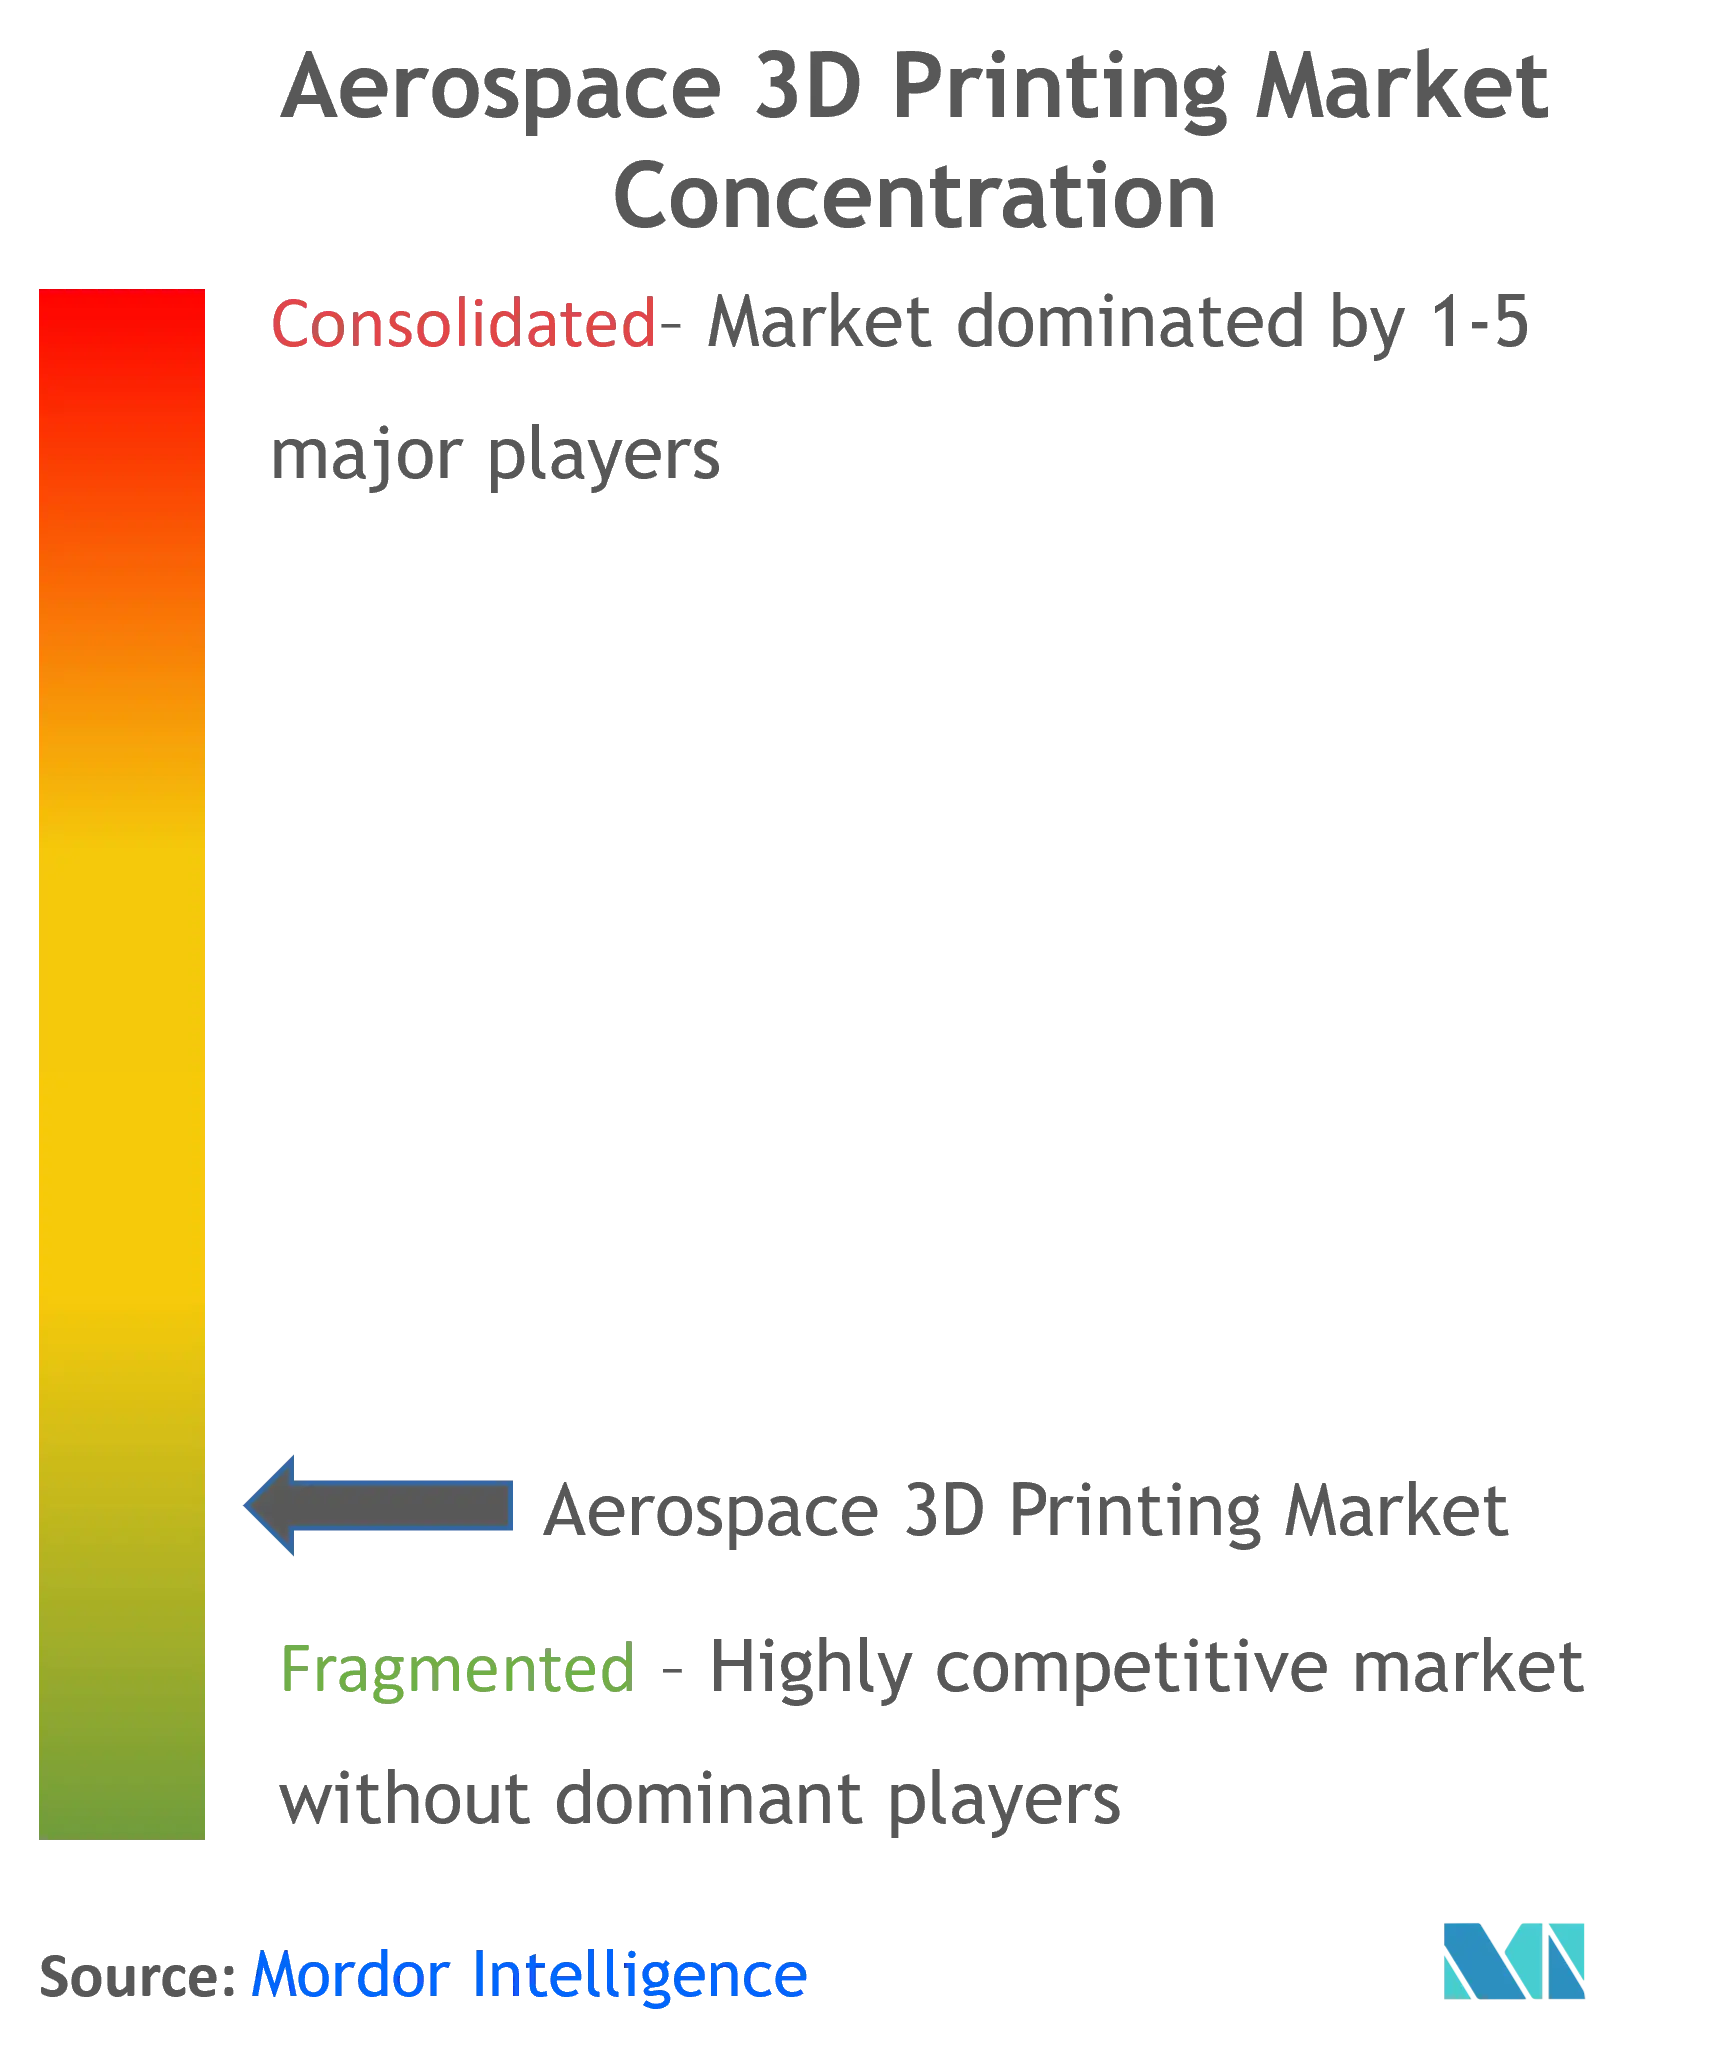 3D Printing In Aerospace And Defense Market Concentration